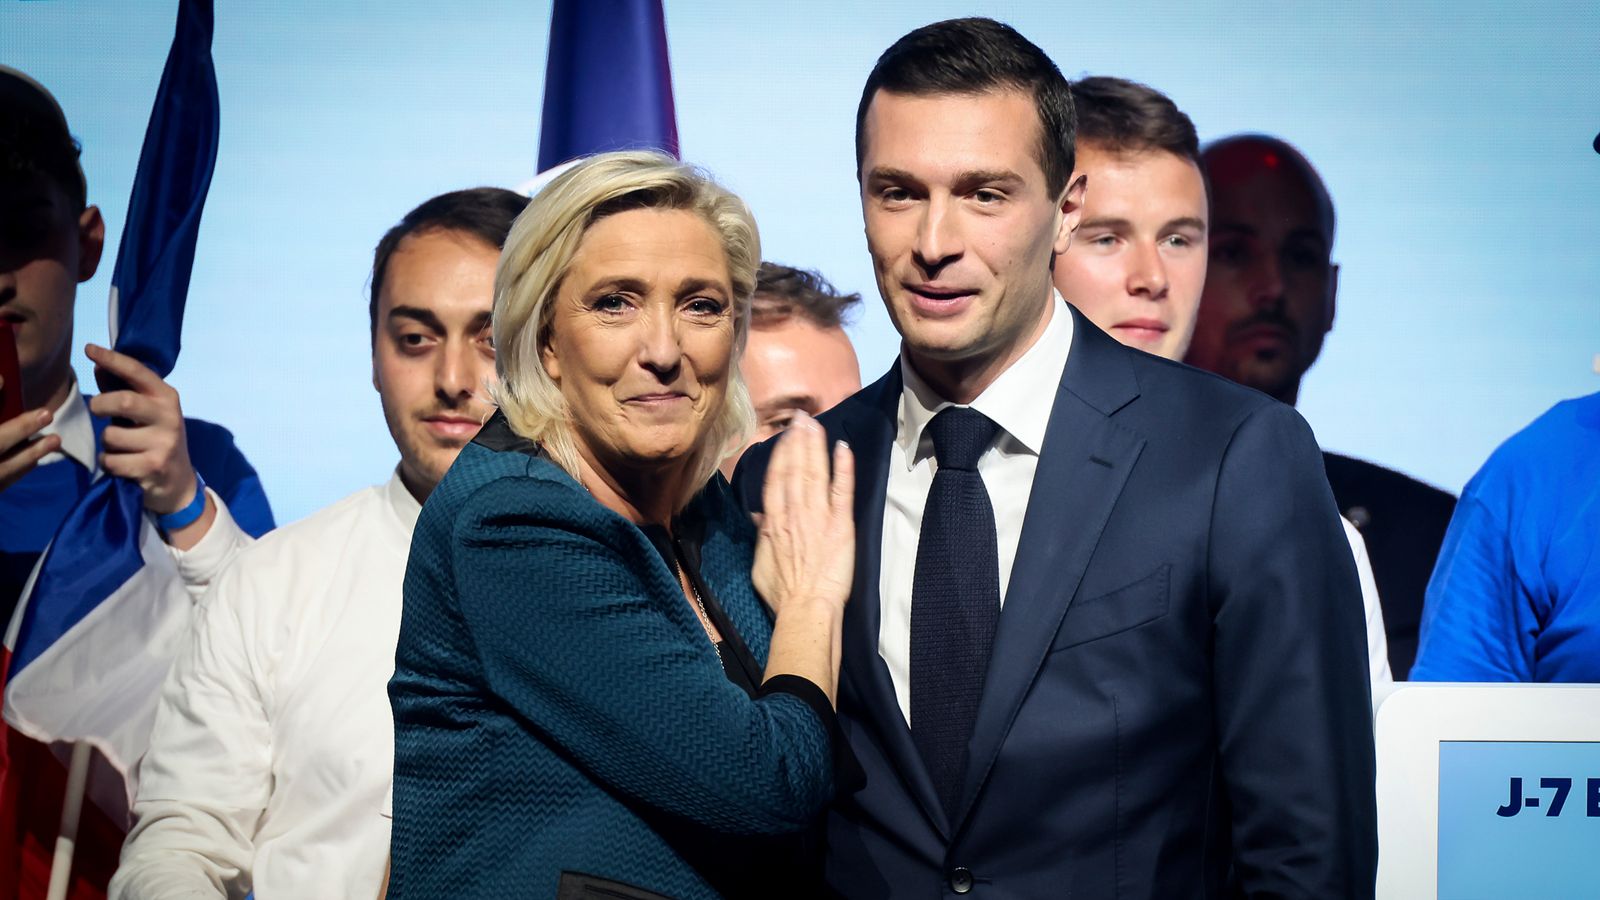 France: In Marine Le Pen's heartland, her supporters think that now is their time